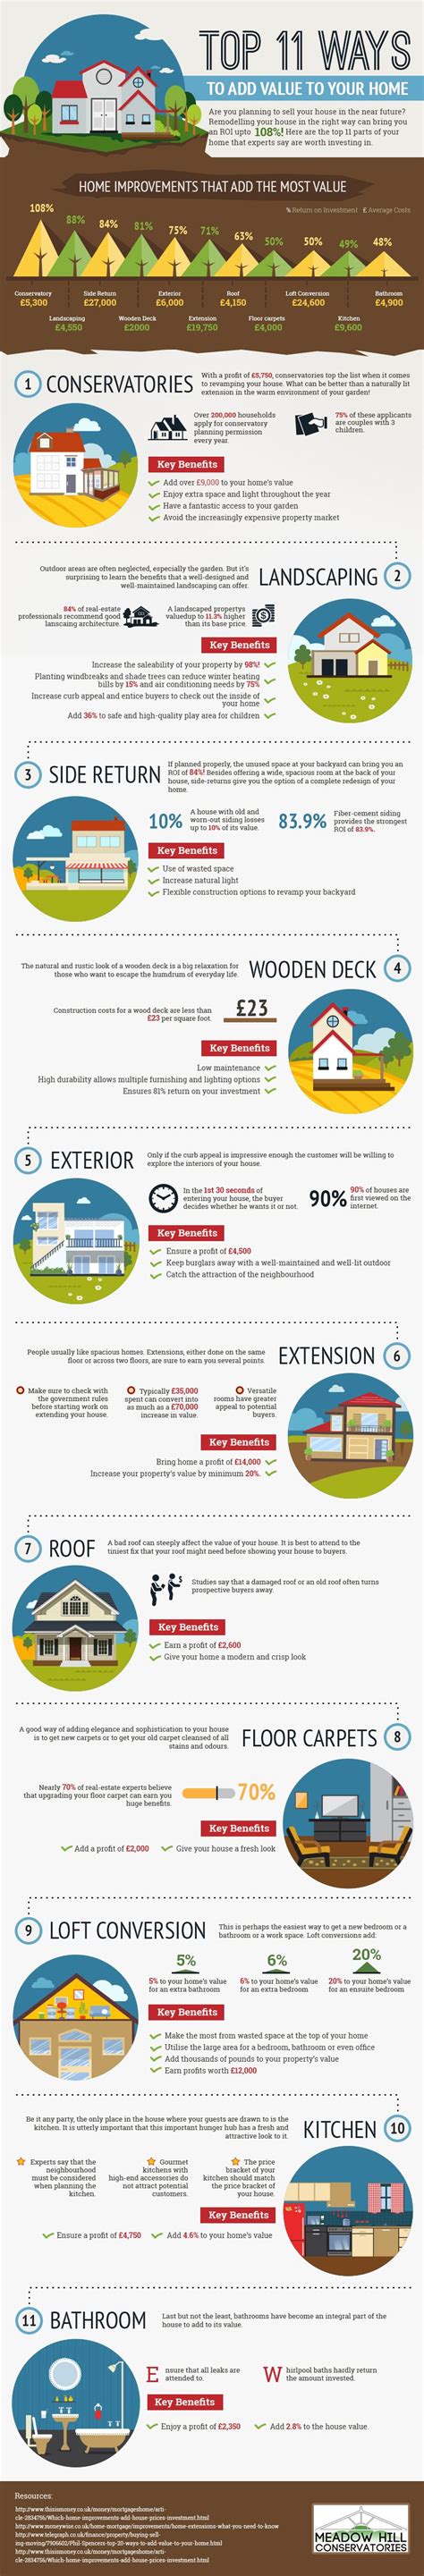 Best Ways To Add Value To Your Home Infographic Visualistan